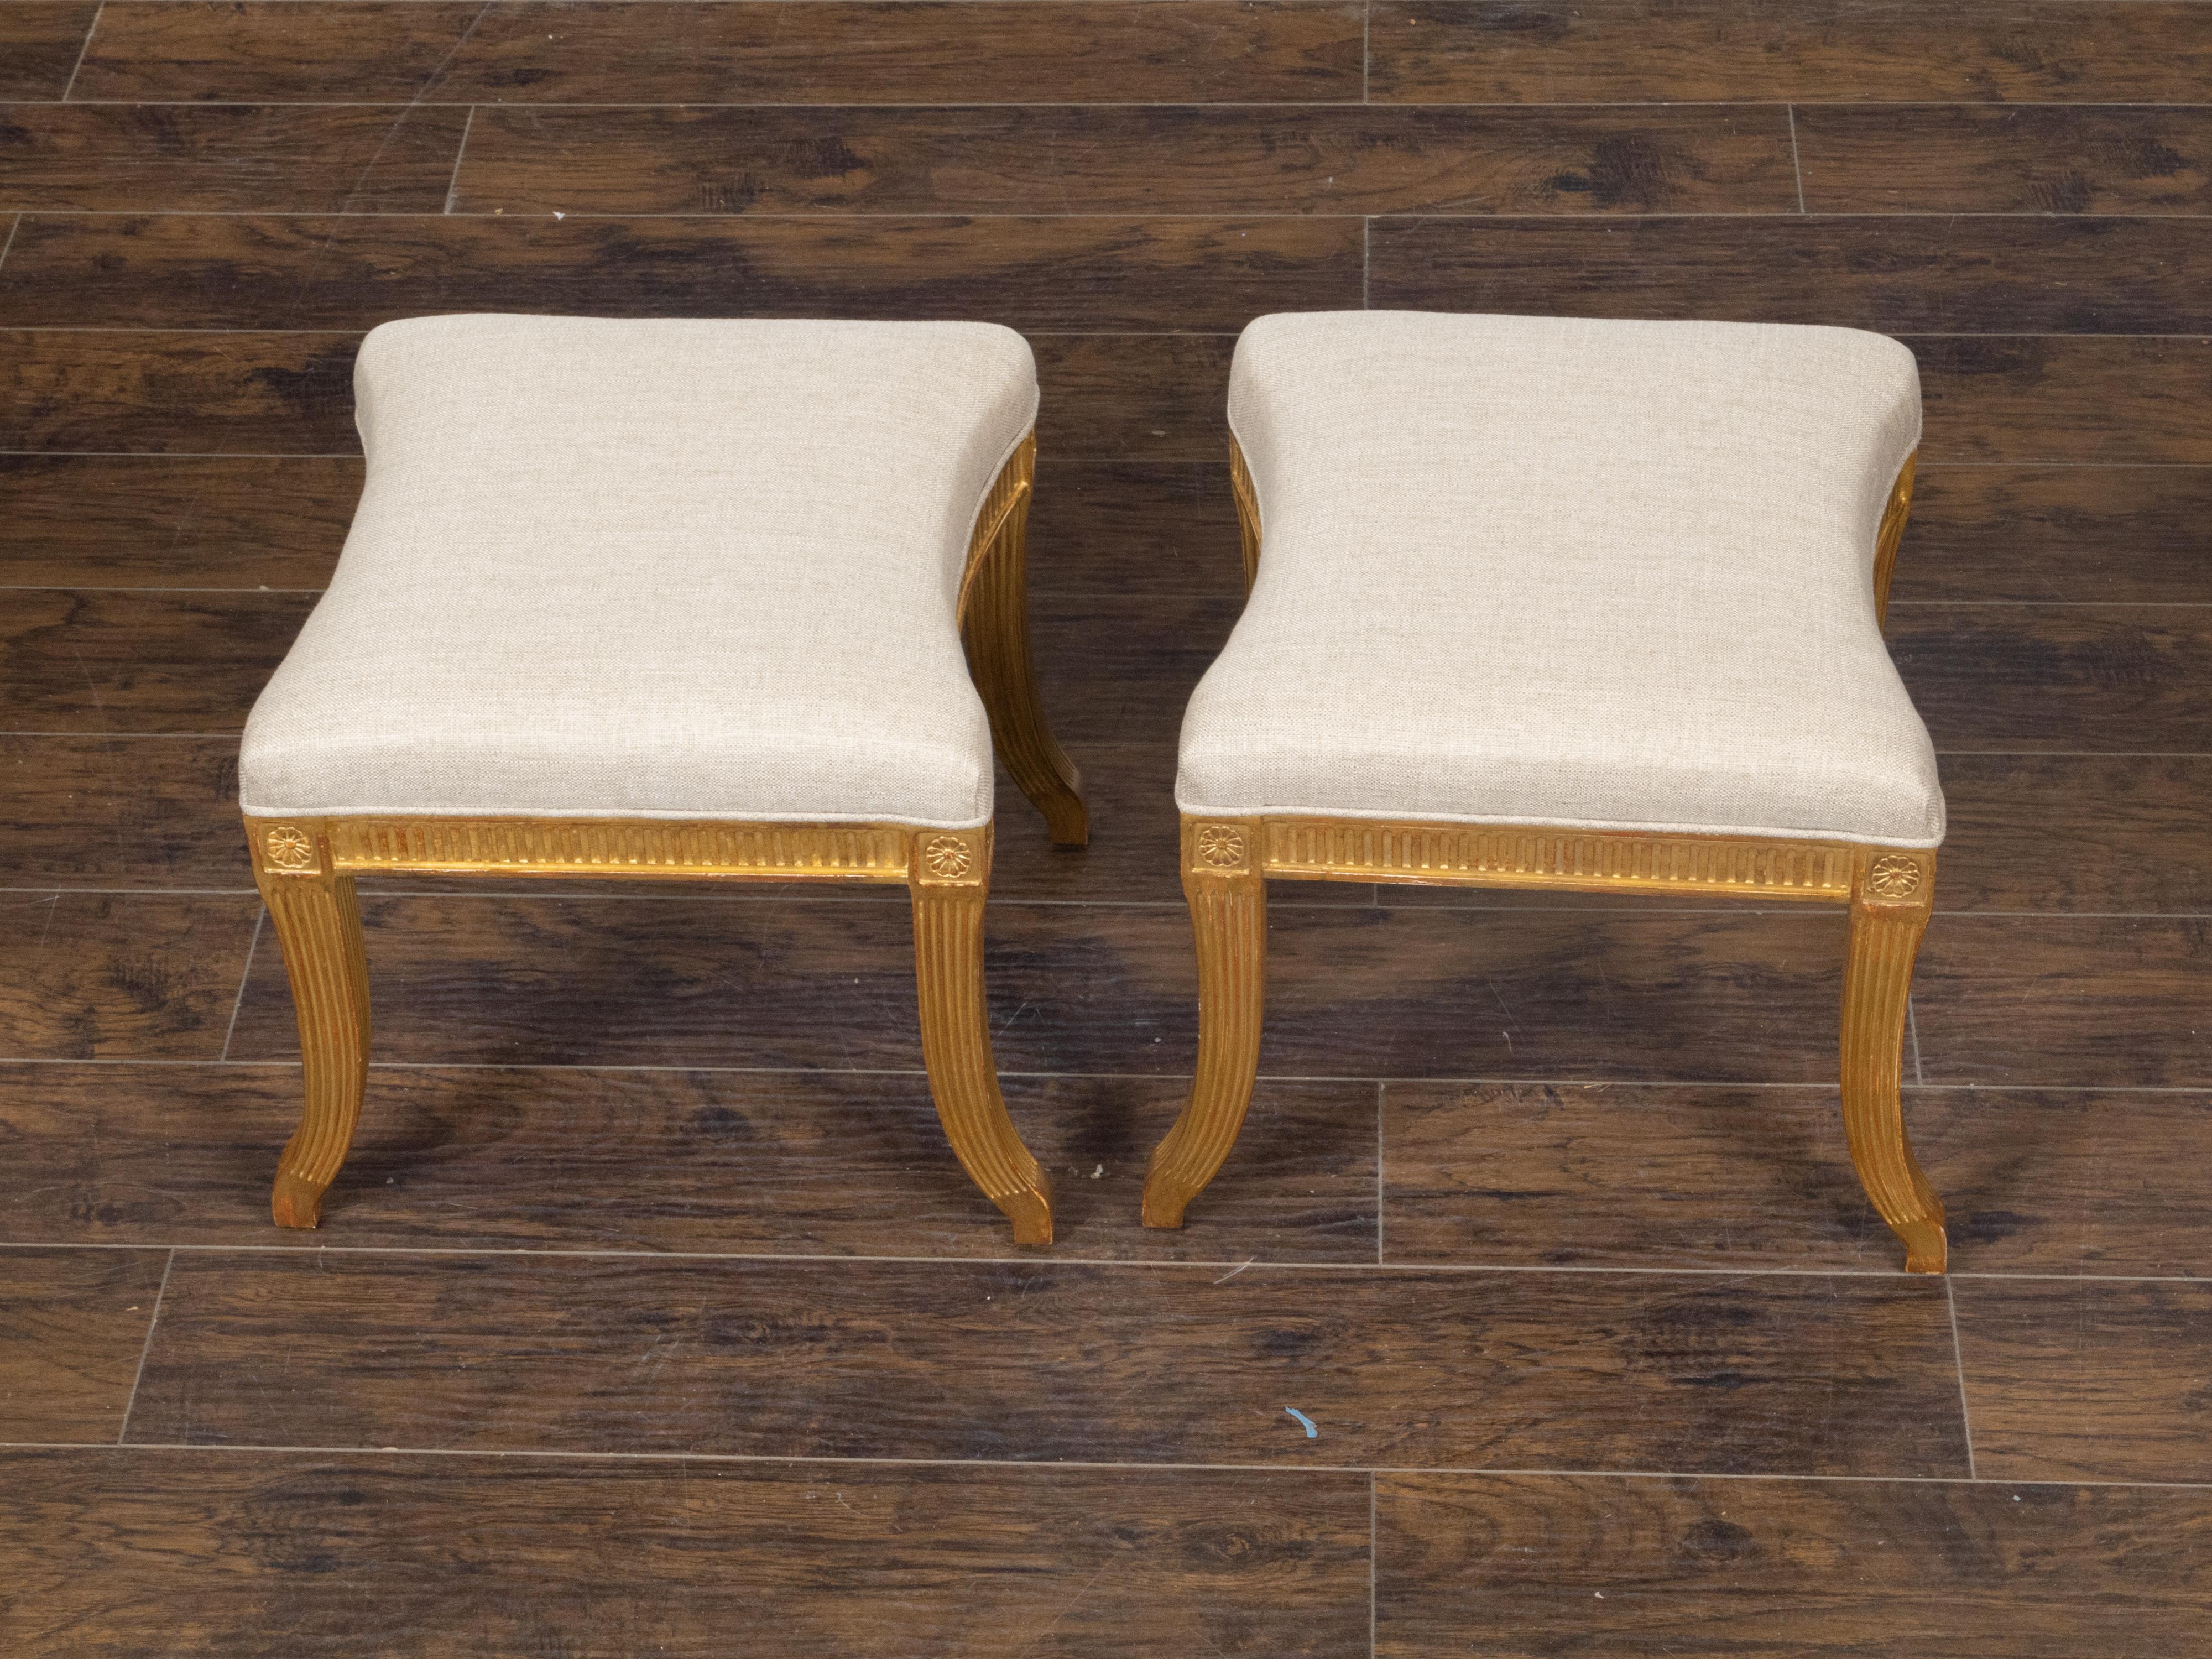 A pair of French vintage Directoire style giltwood stools from the mid 20th century with carved rosettes, fluted accents, saber legs and new linen upholstery. This handsome pair of French vintage Directoire style giltwood stools from the mid-20th